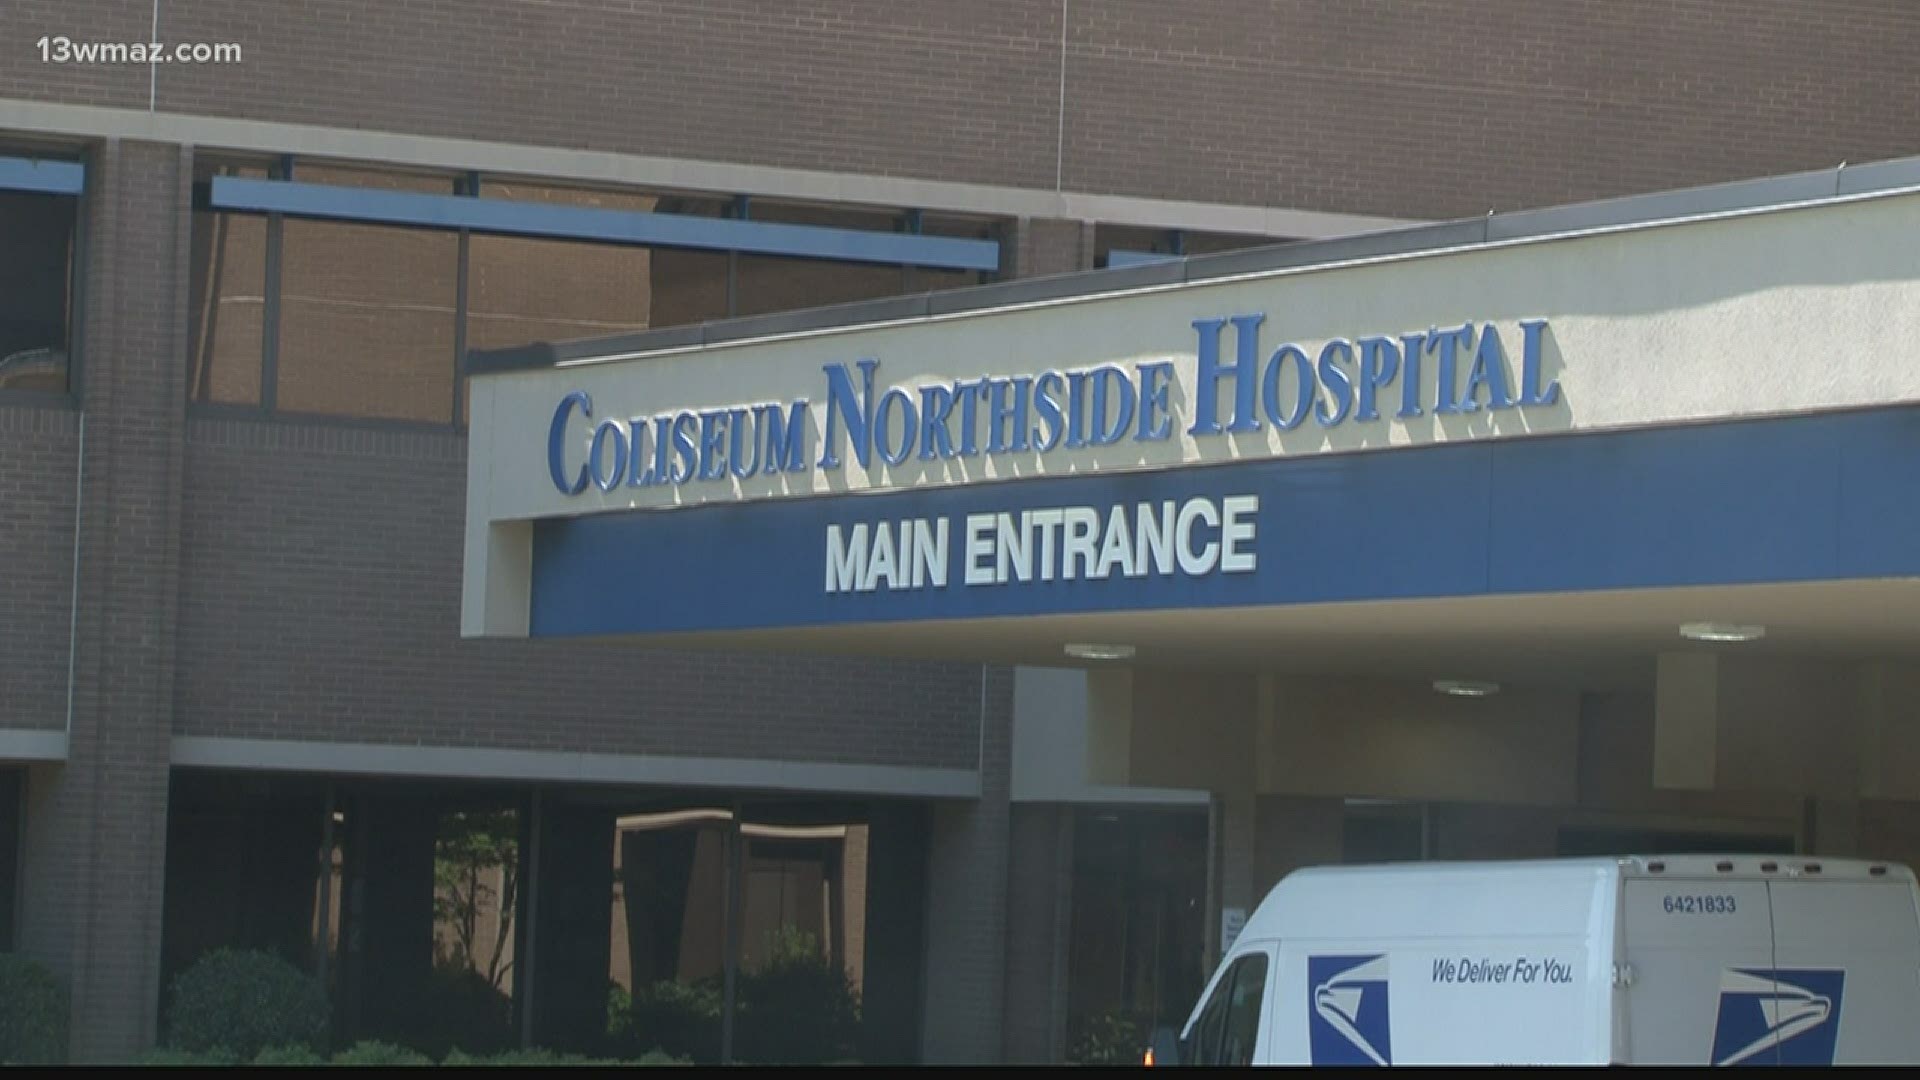 Coliseum Northside Hospital is suspending some services and moving staff to their main Coliseum Hospital due to a reduced number of patients